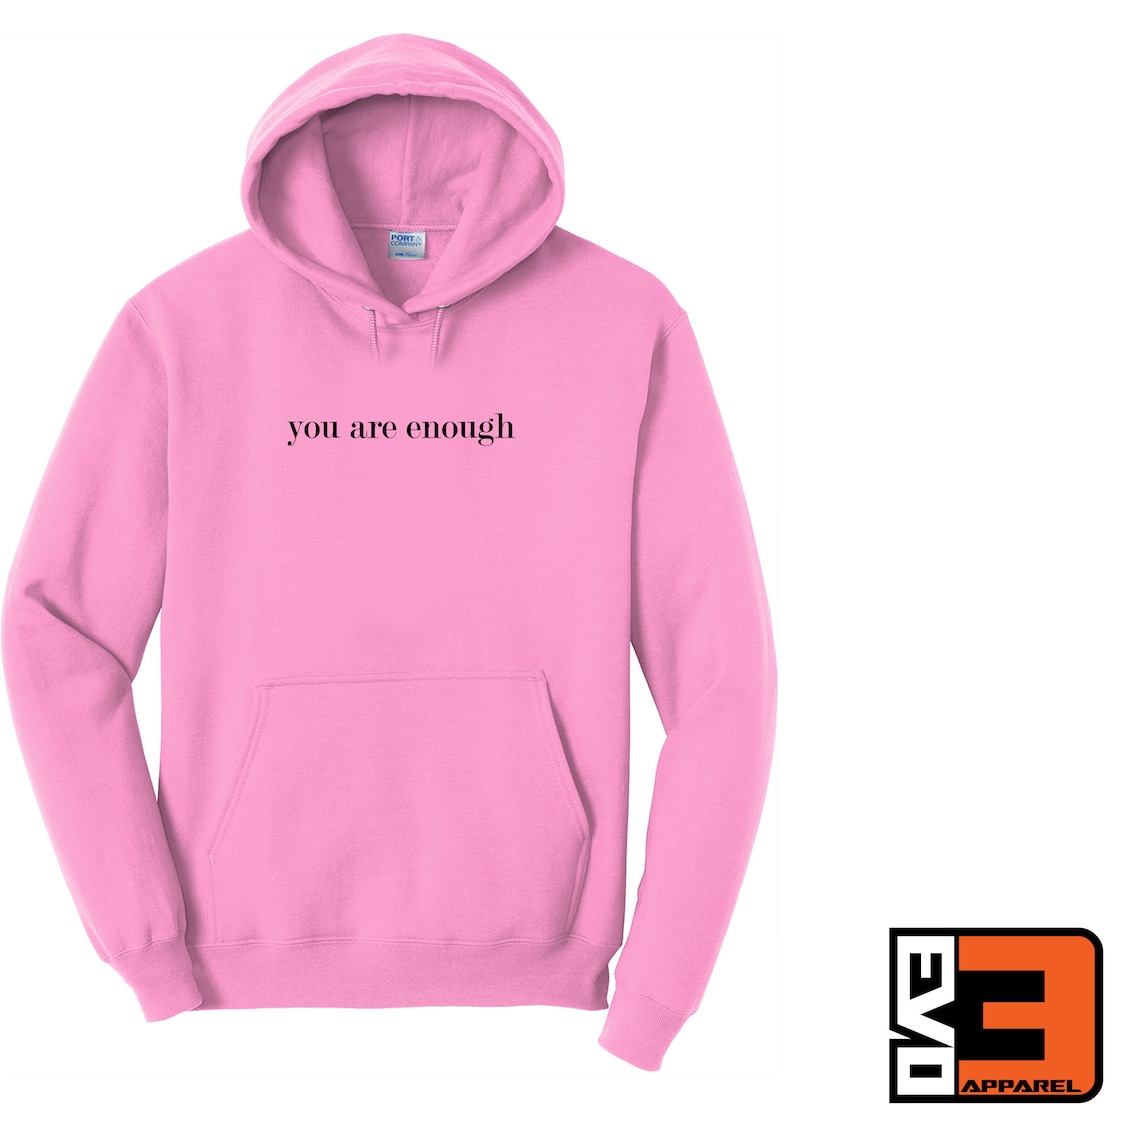 You Are Enough Hoodie Inspirational Hoodie Inspirational | Etsy